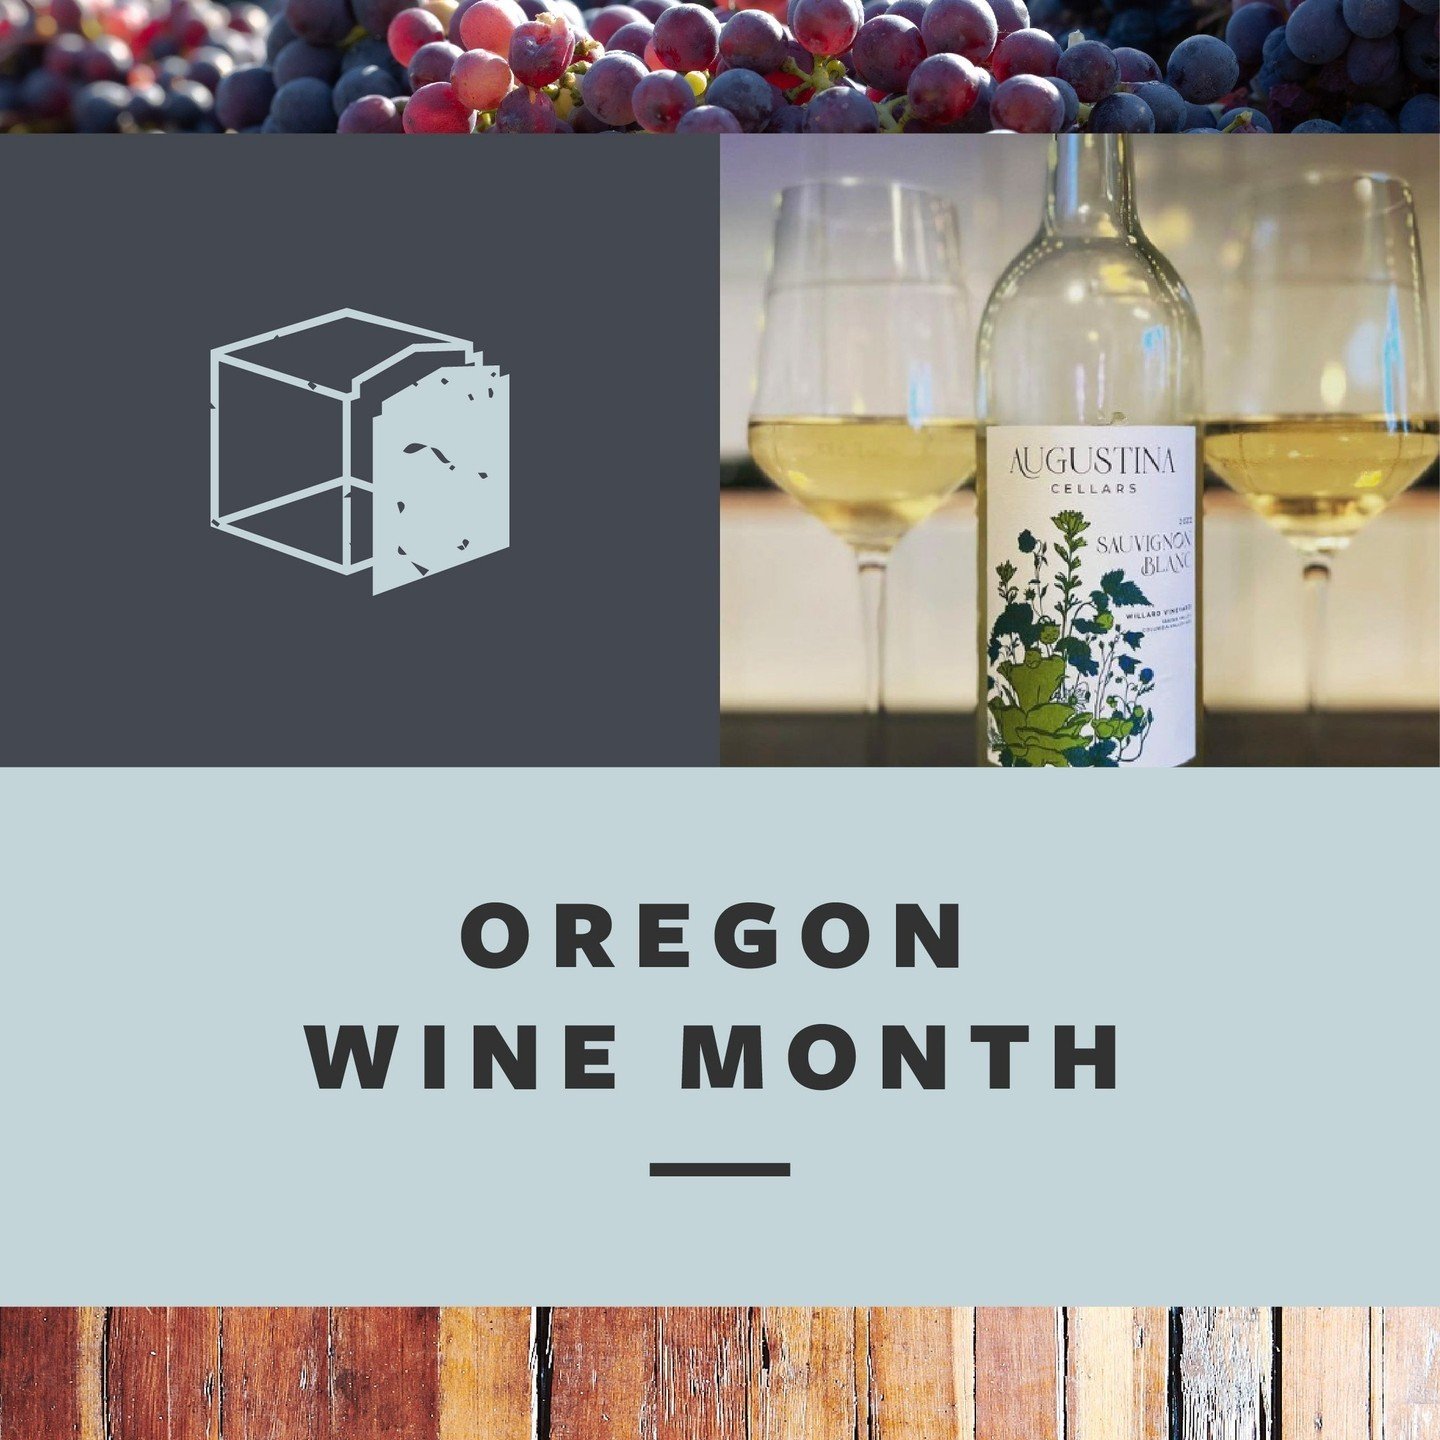 The month of May means Oregon Wine Month is in full swing!⁠
⁠
Our Collective has seen so many incredible wine teams come crush and bottle their wines onsite over the years, with @adega_nw_wines being our communal hub of it all! ⁠
⁠
We raise a glass t